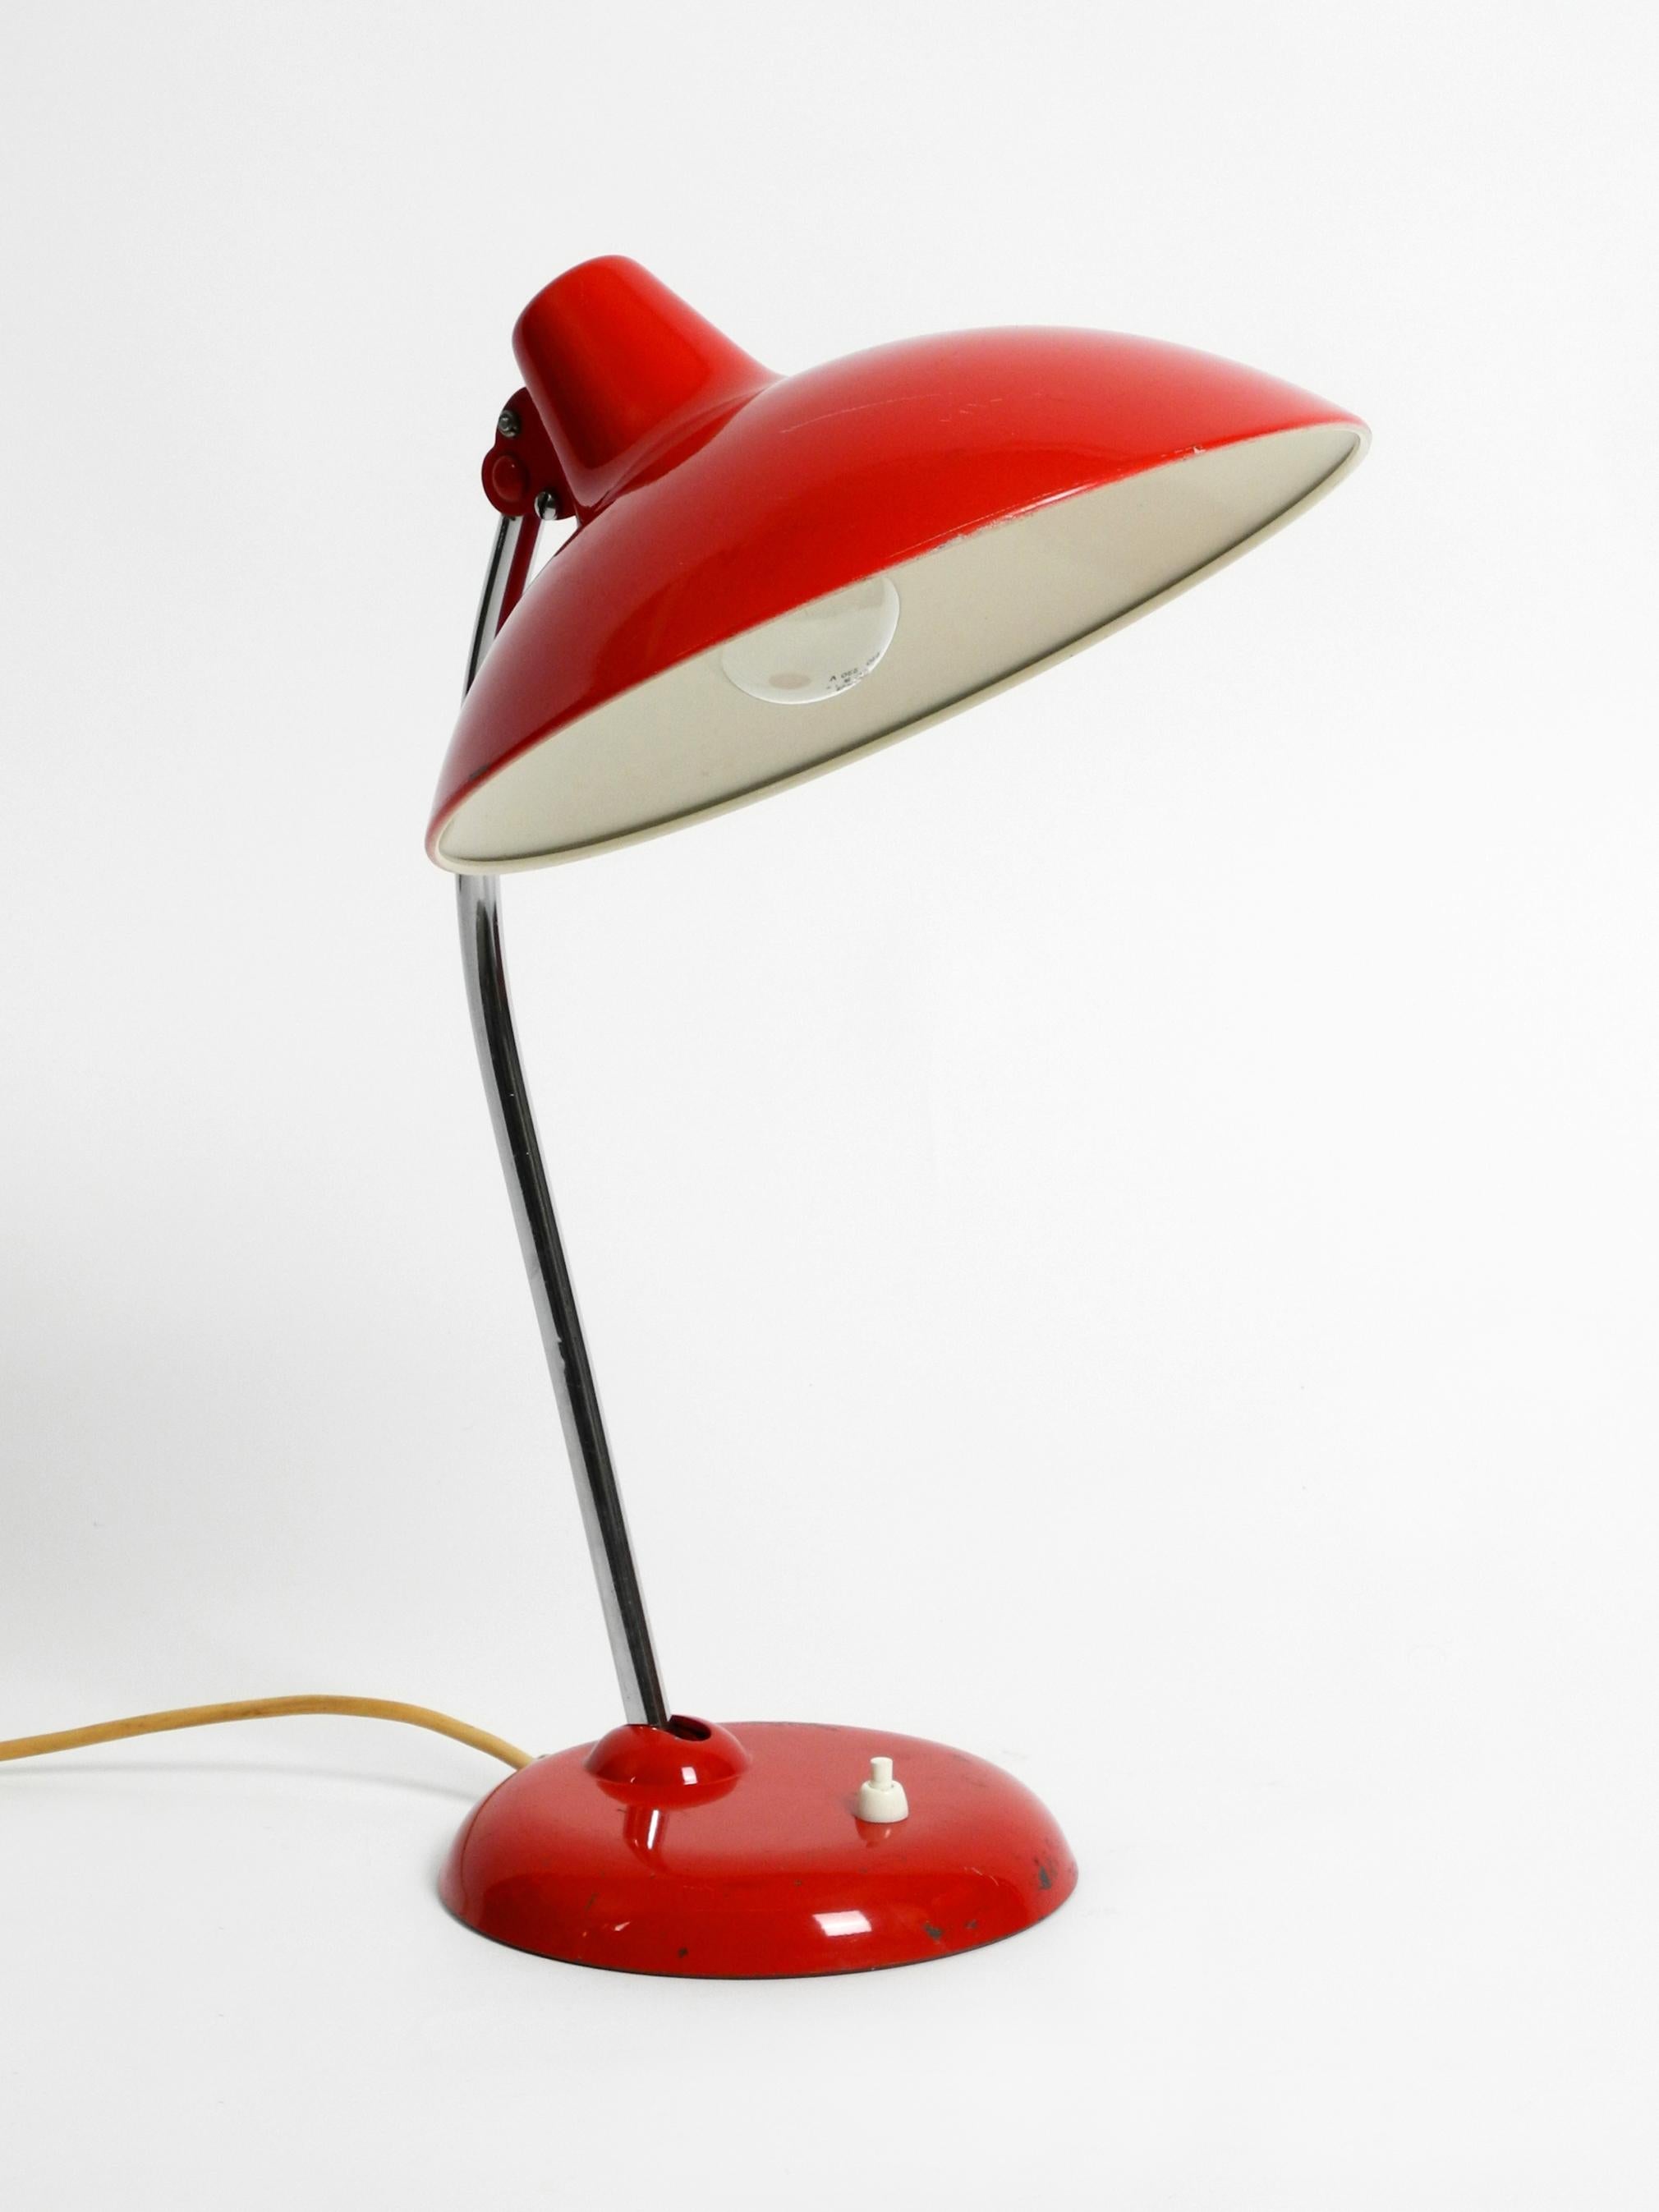 Original Classic Red Kaiser Idell Metal Table Lamp Model 6786 from the 1960s For Sale 5